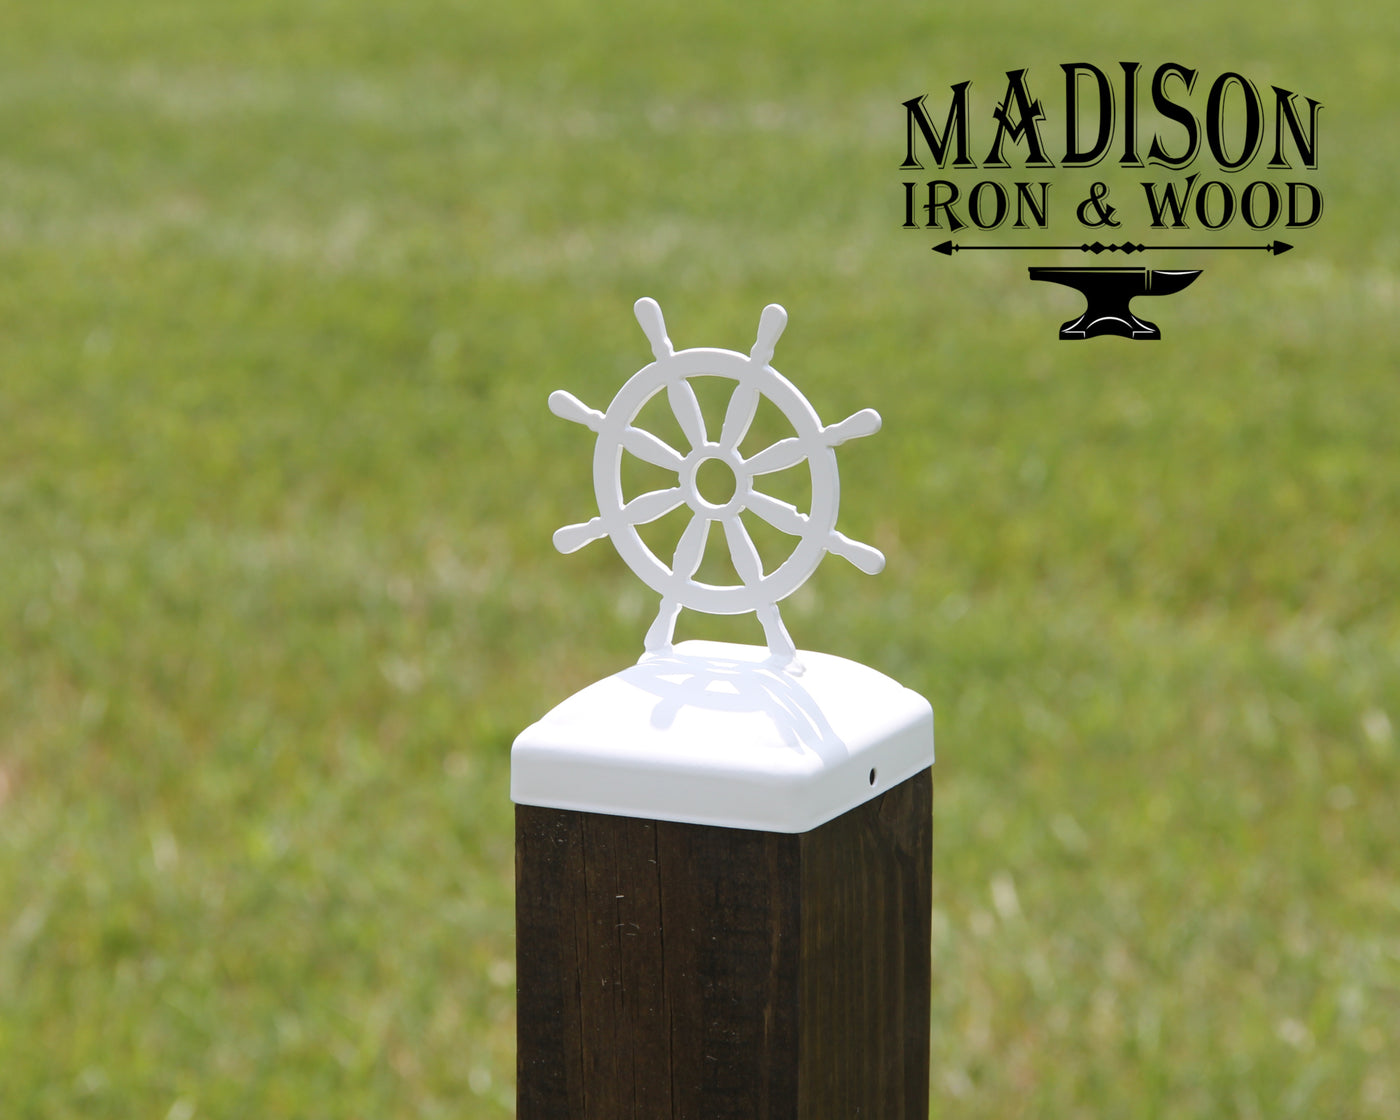 4x4 Ship Wheel Post Cap - Madison Iron and Wood - Post Cap - metal outdoor decor - Steel deocrations - american made products - veteran owned business products - fencing decorations - fencing supplies - custom wall decorations - personalized wall signs - steel - decorative post caps - steel post caps - metal post caps - brackets - structural brackets - home improvement - easter - easter decorations - easter gift - easter yard decor